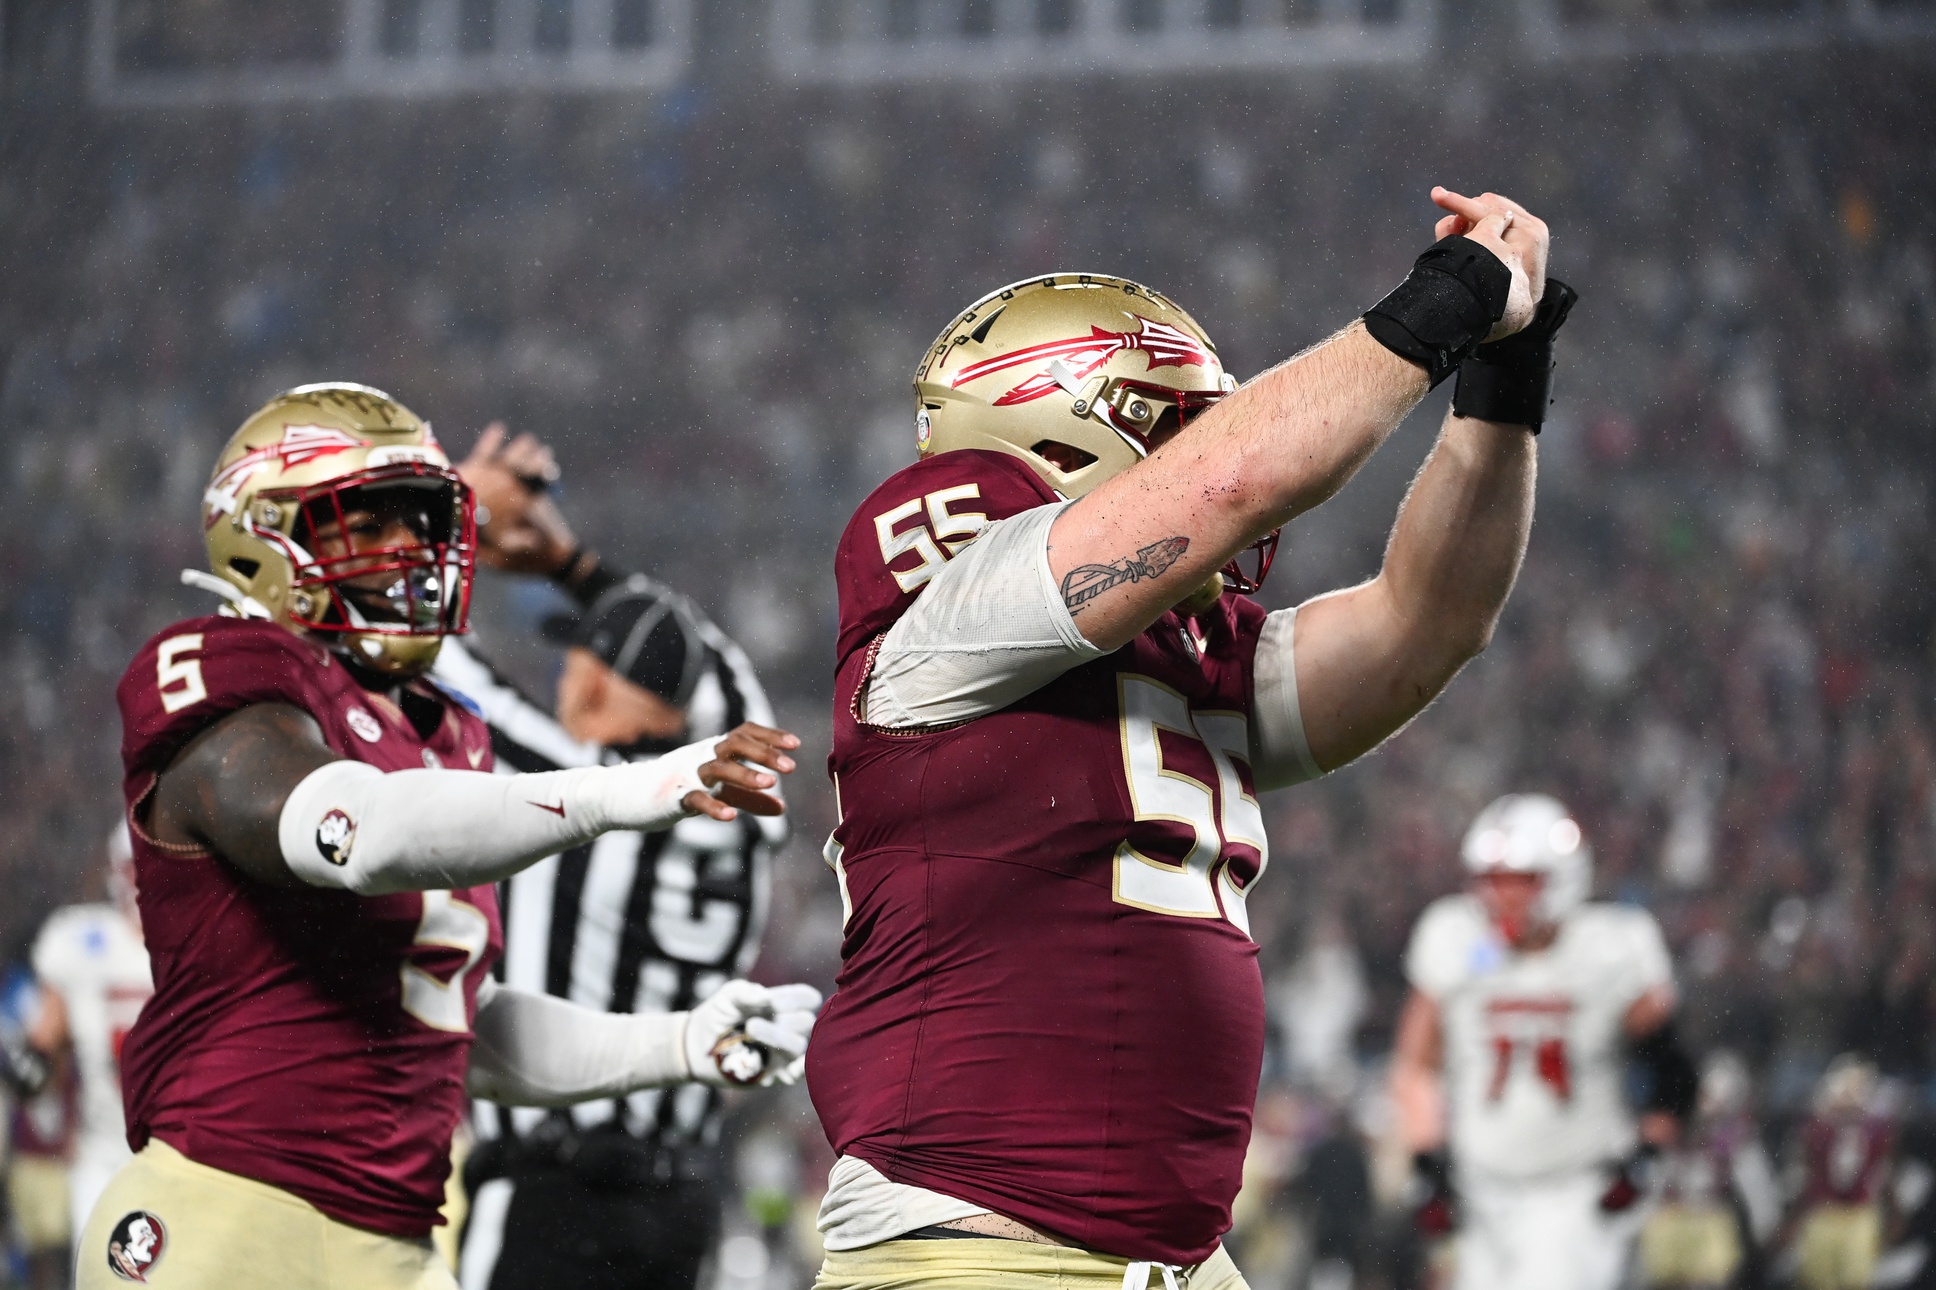 Dec 2, 2023; Charlotte, NC, USA; Florida State Seminoles defensive lineman Braden Fiske (55) gestures to his ring finger after sacking Louisville Cardinals quarterback Jack Plummer (not pictured) in the fourth quarter at Bank of America Stadium. Mandatory Credit: Bob Donnan-USA TODAY Sports  